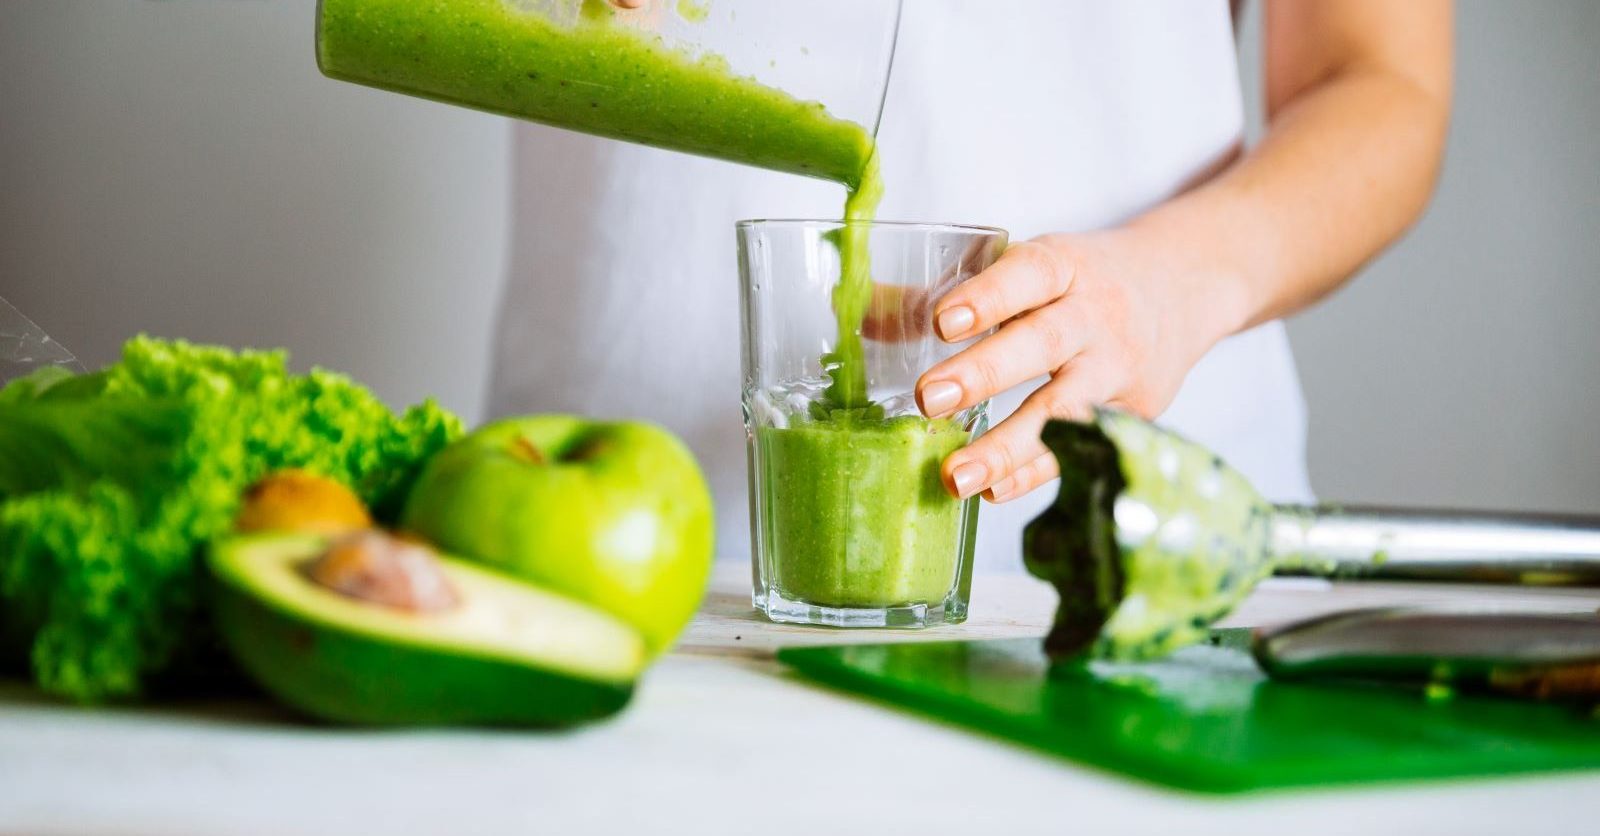 You might be tempted to try a cleanse or detox to start the year off on the right foot. But are they a safe and healthy option?